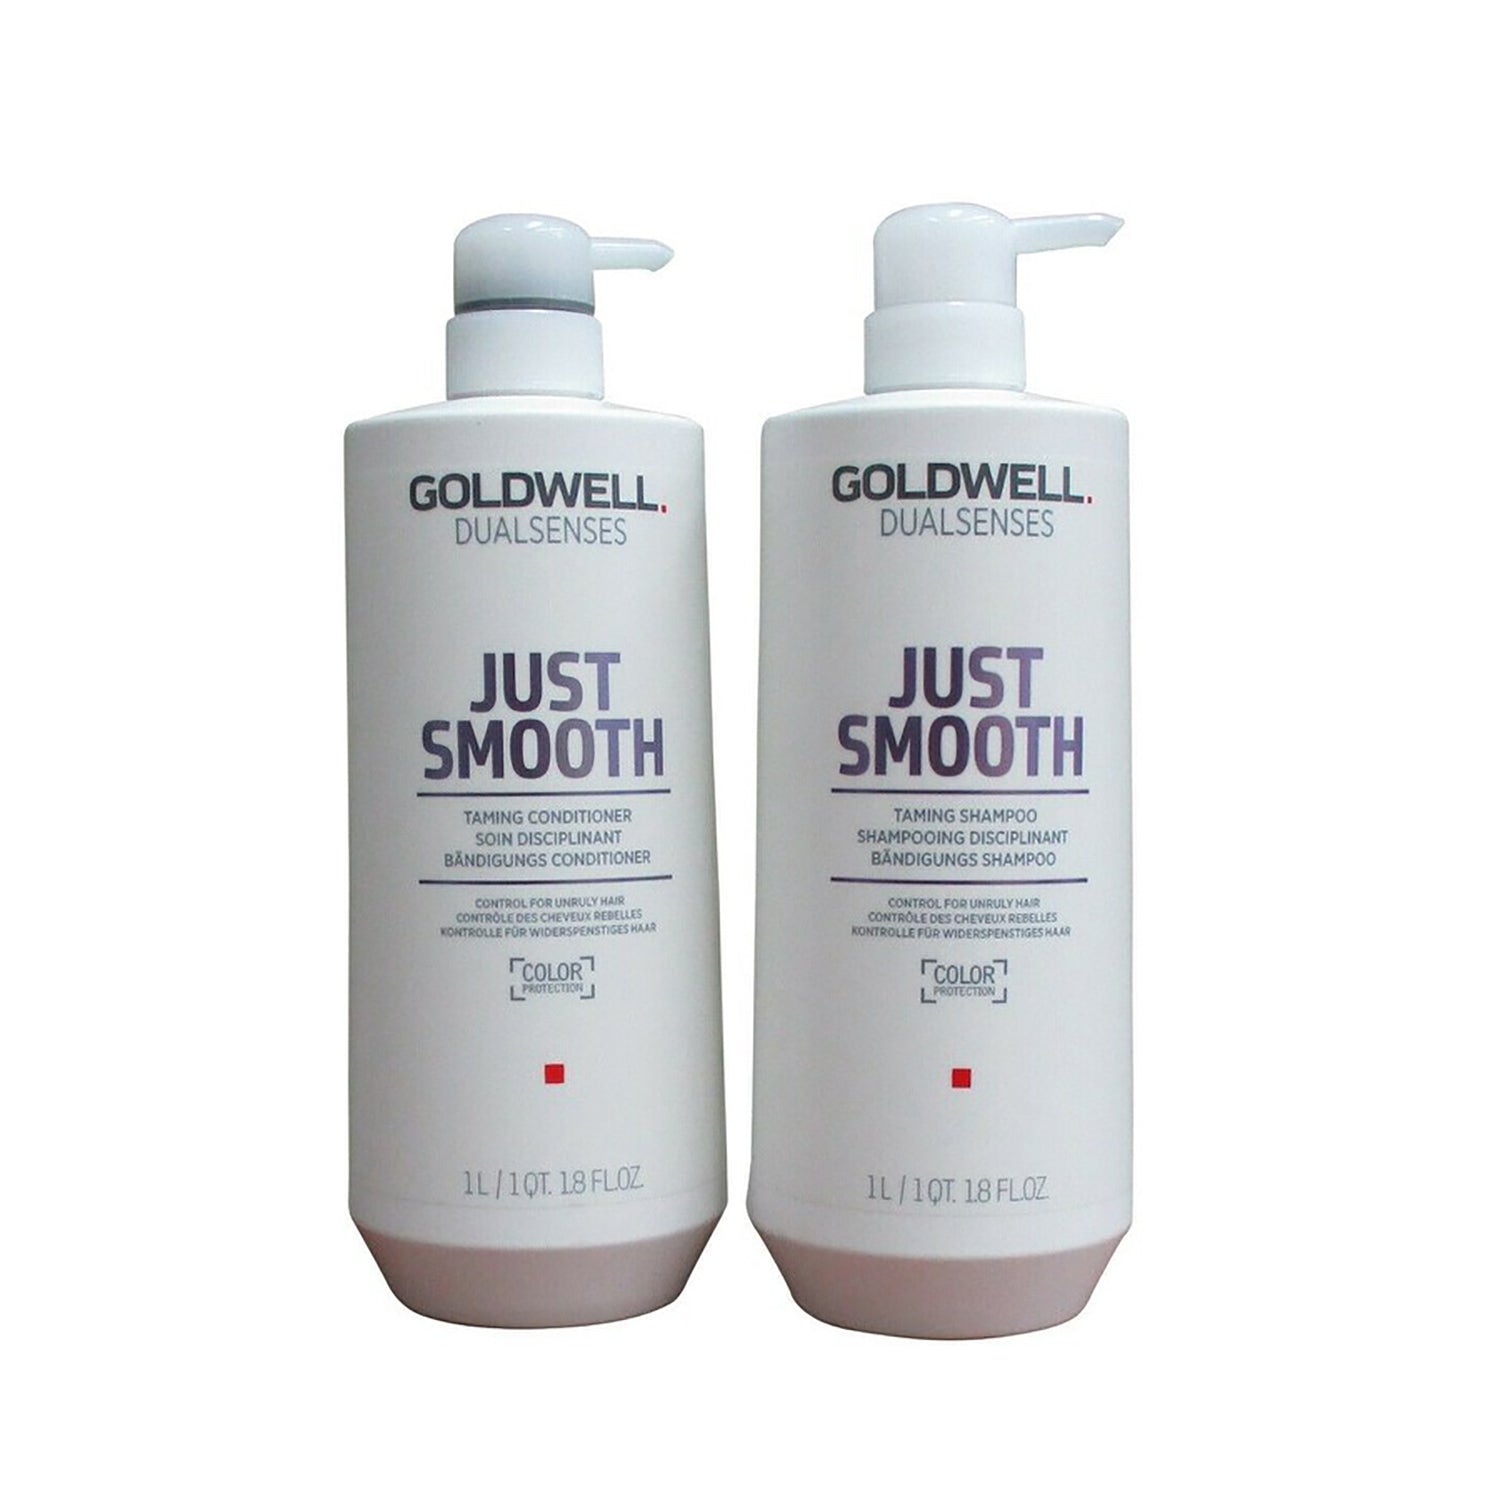 Goldwell Just Smooth Taming Shampoo and Conditioner Liter Set ($85 Value) / 33.8OZ